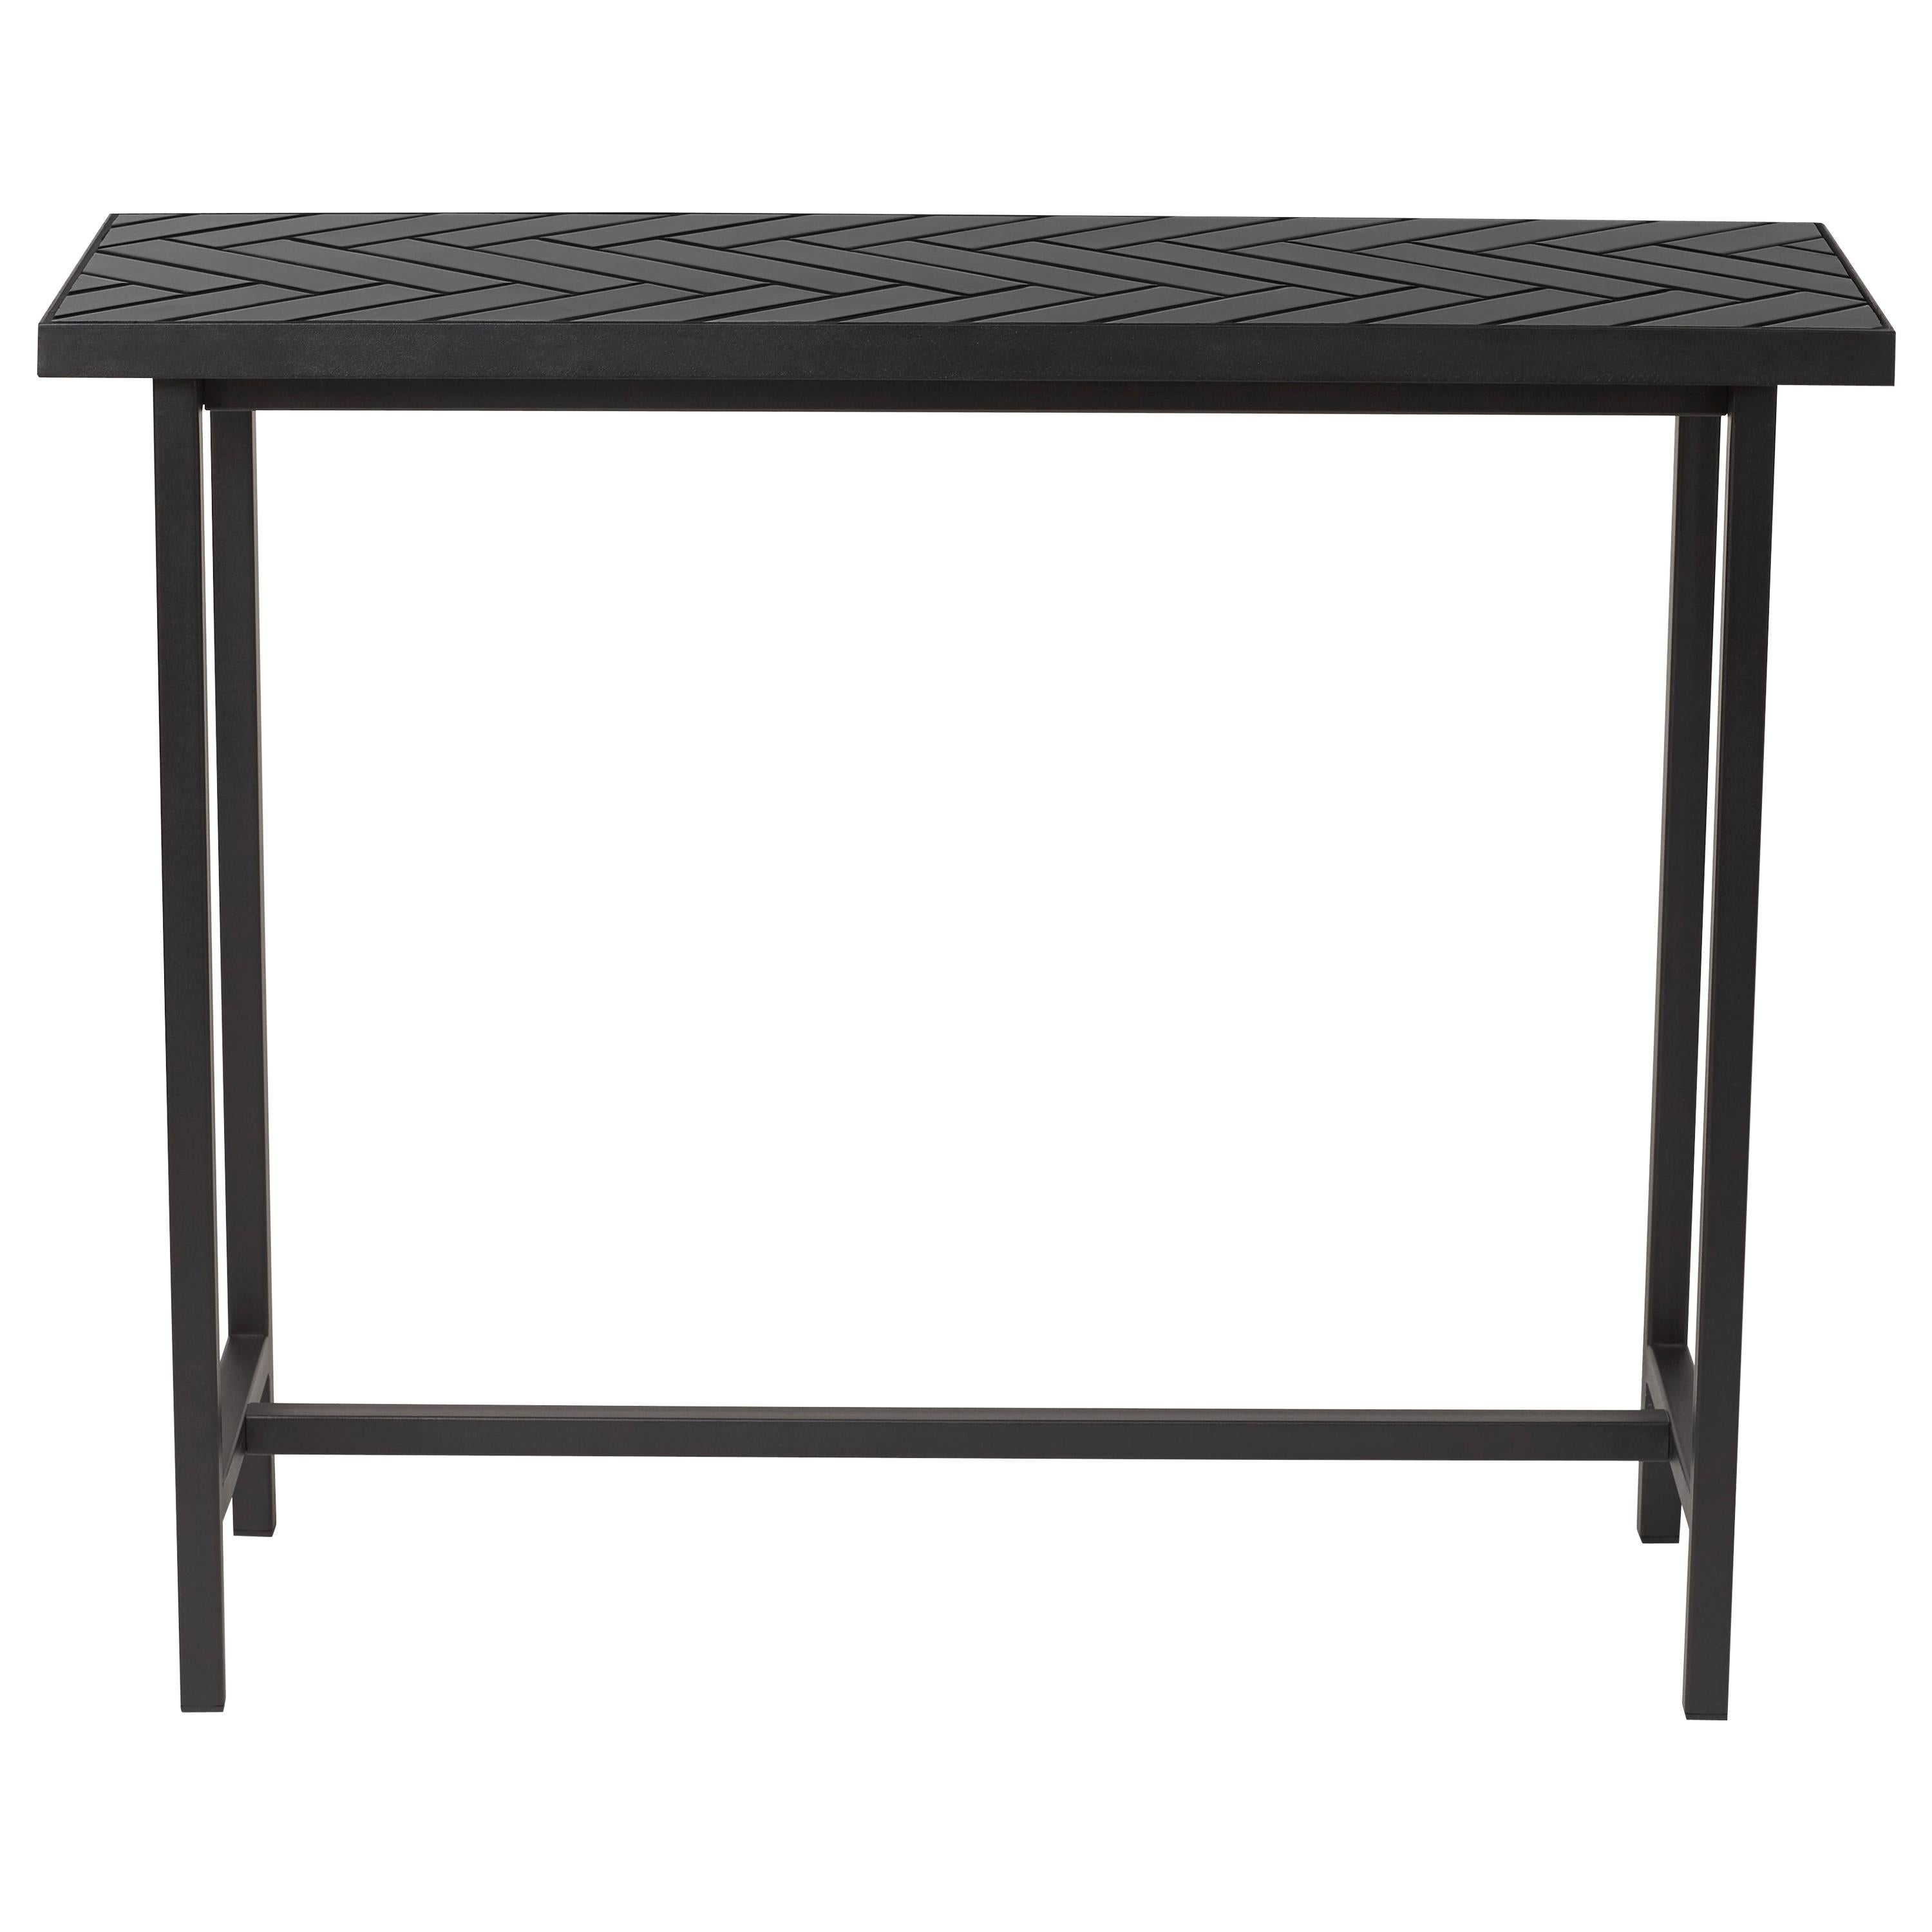 For Sale: Black (Soft black) Herringbone Console Table, by Charlotte Høncke from Warm Nordic